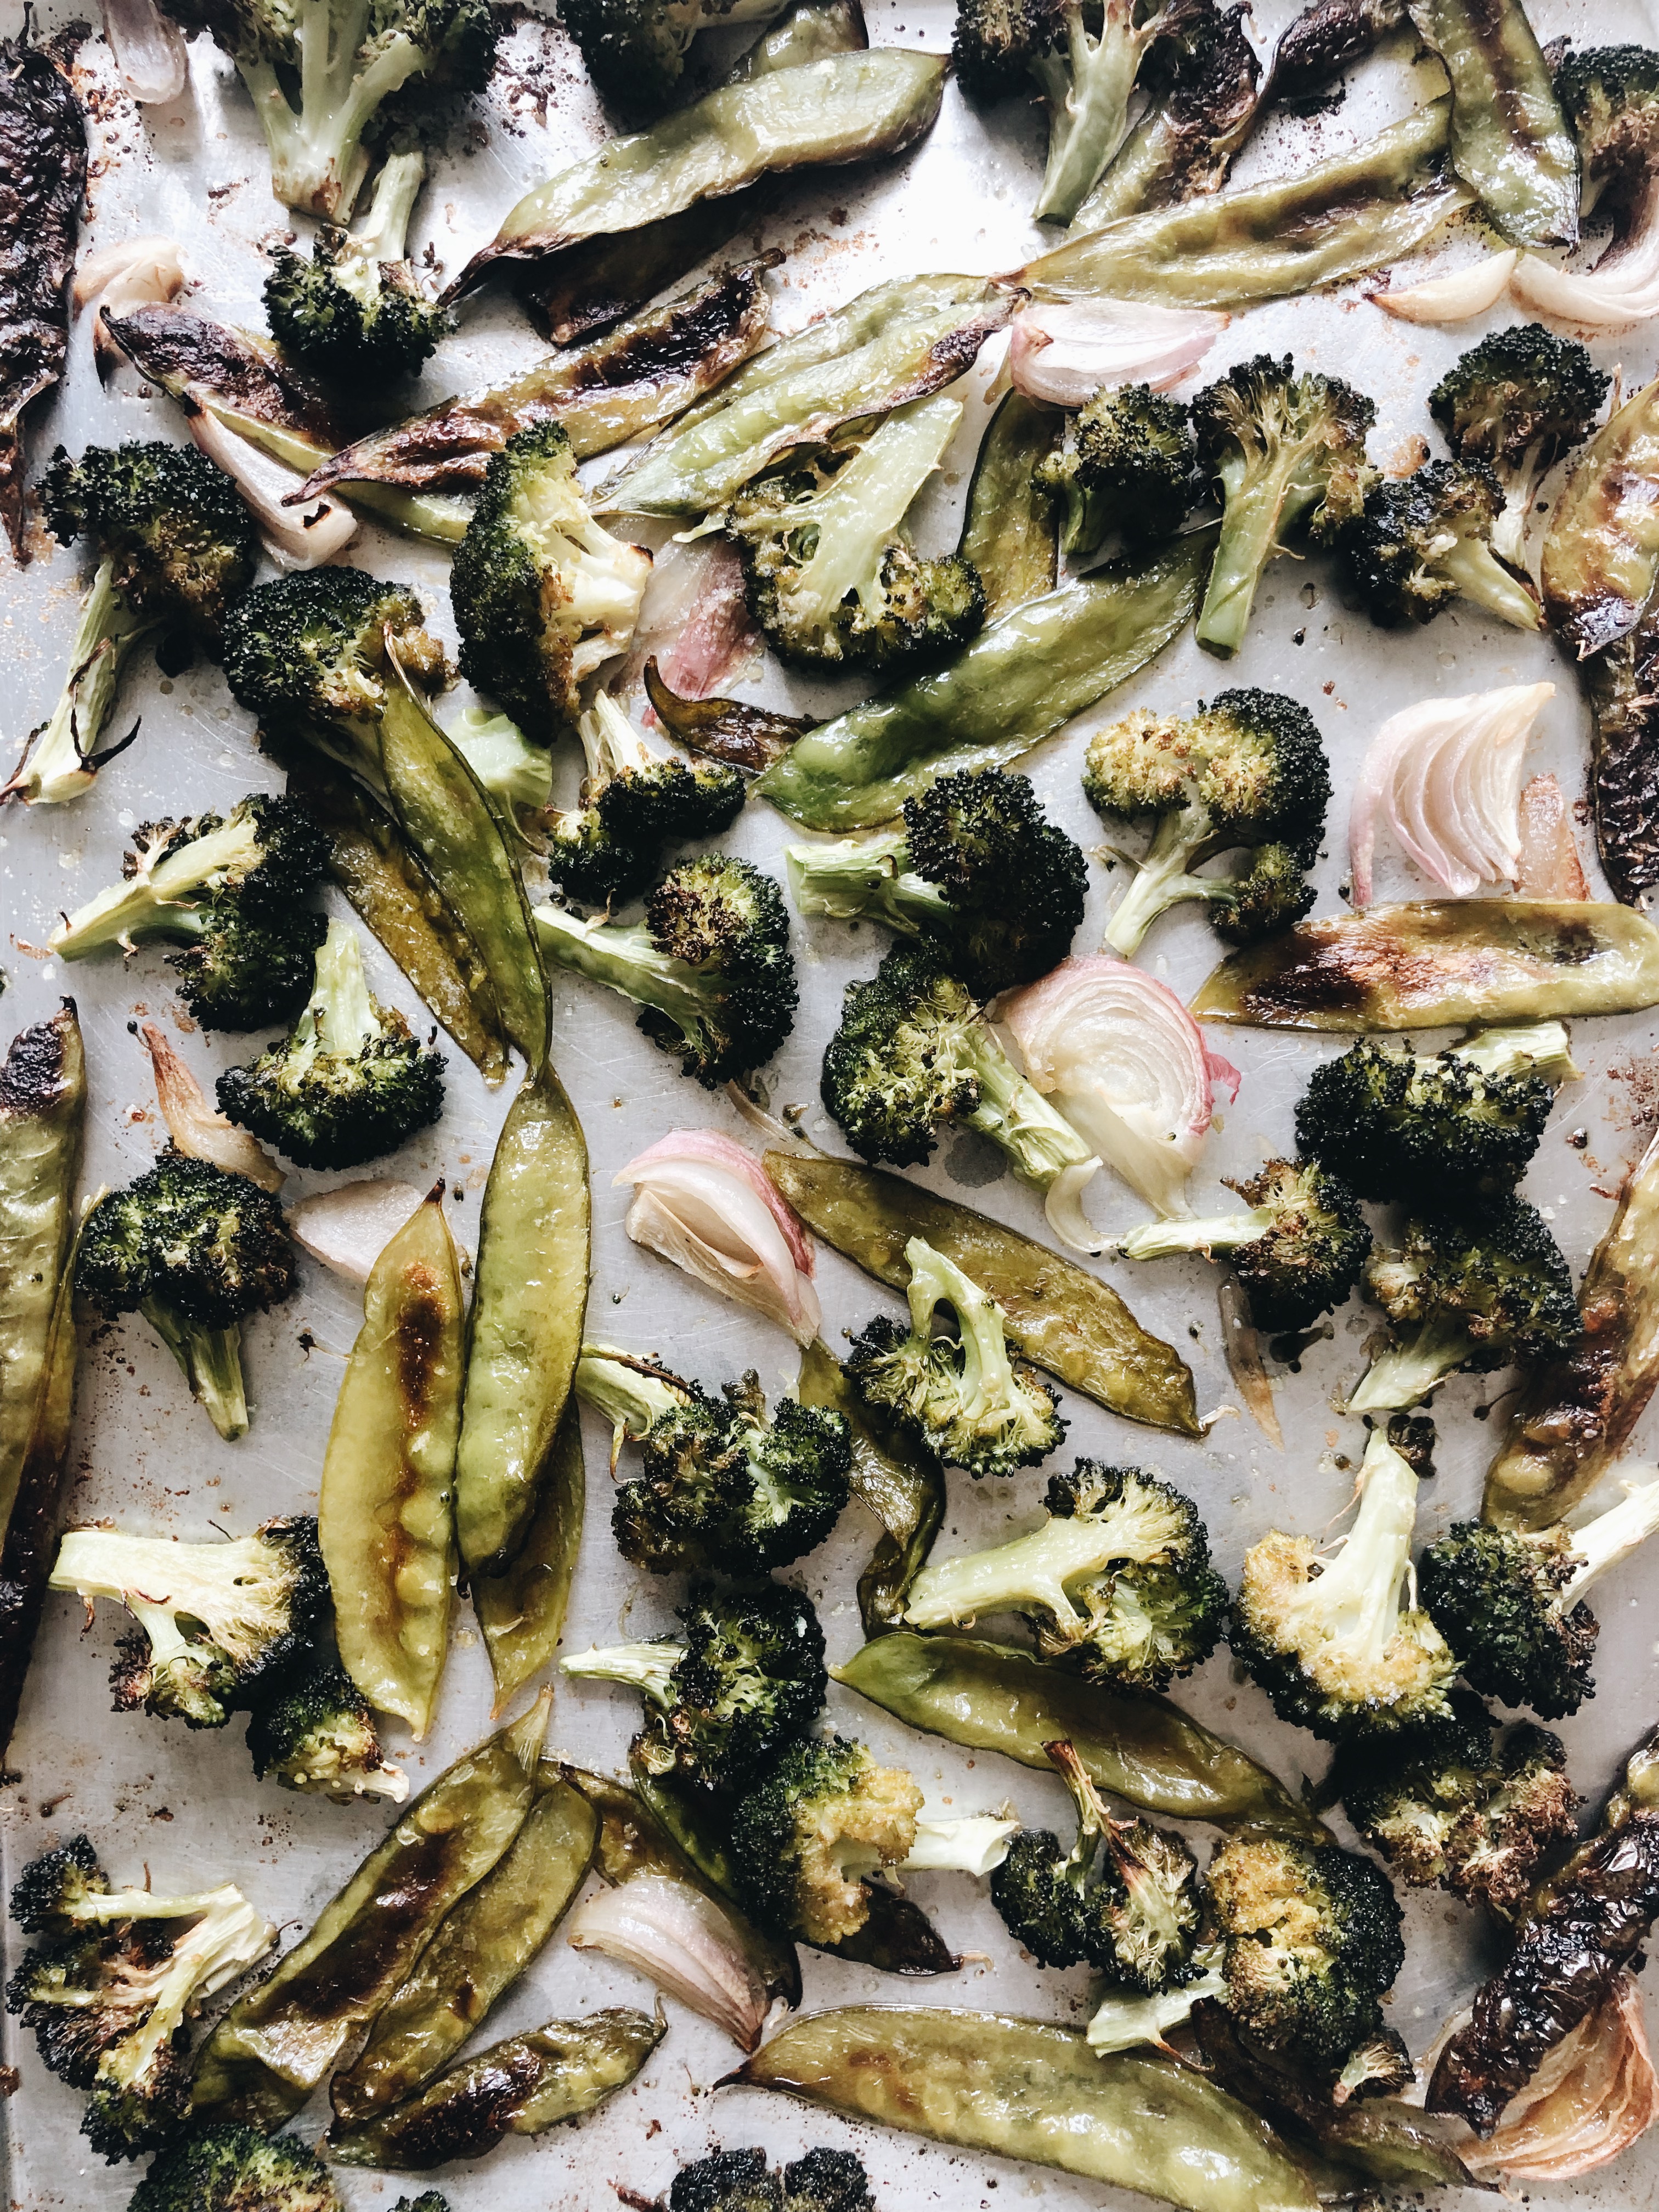 Roasted Broccoli and Snow Peas with Garden Breadcrumbs / Bev Cooks